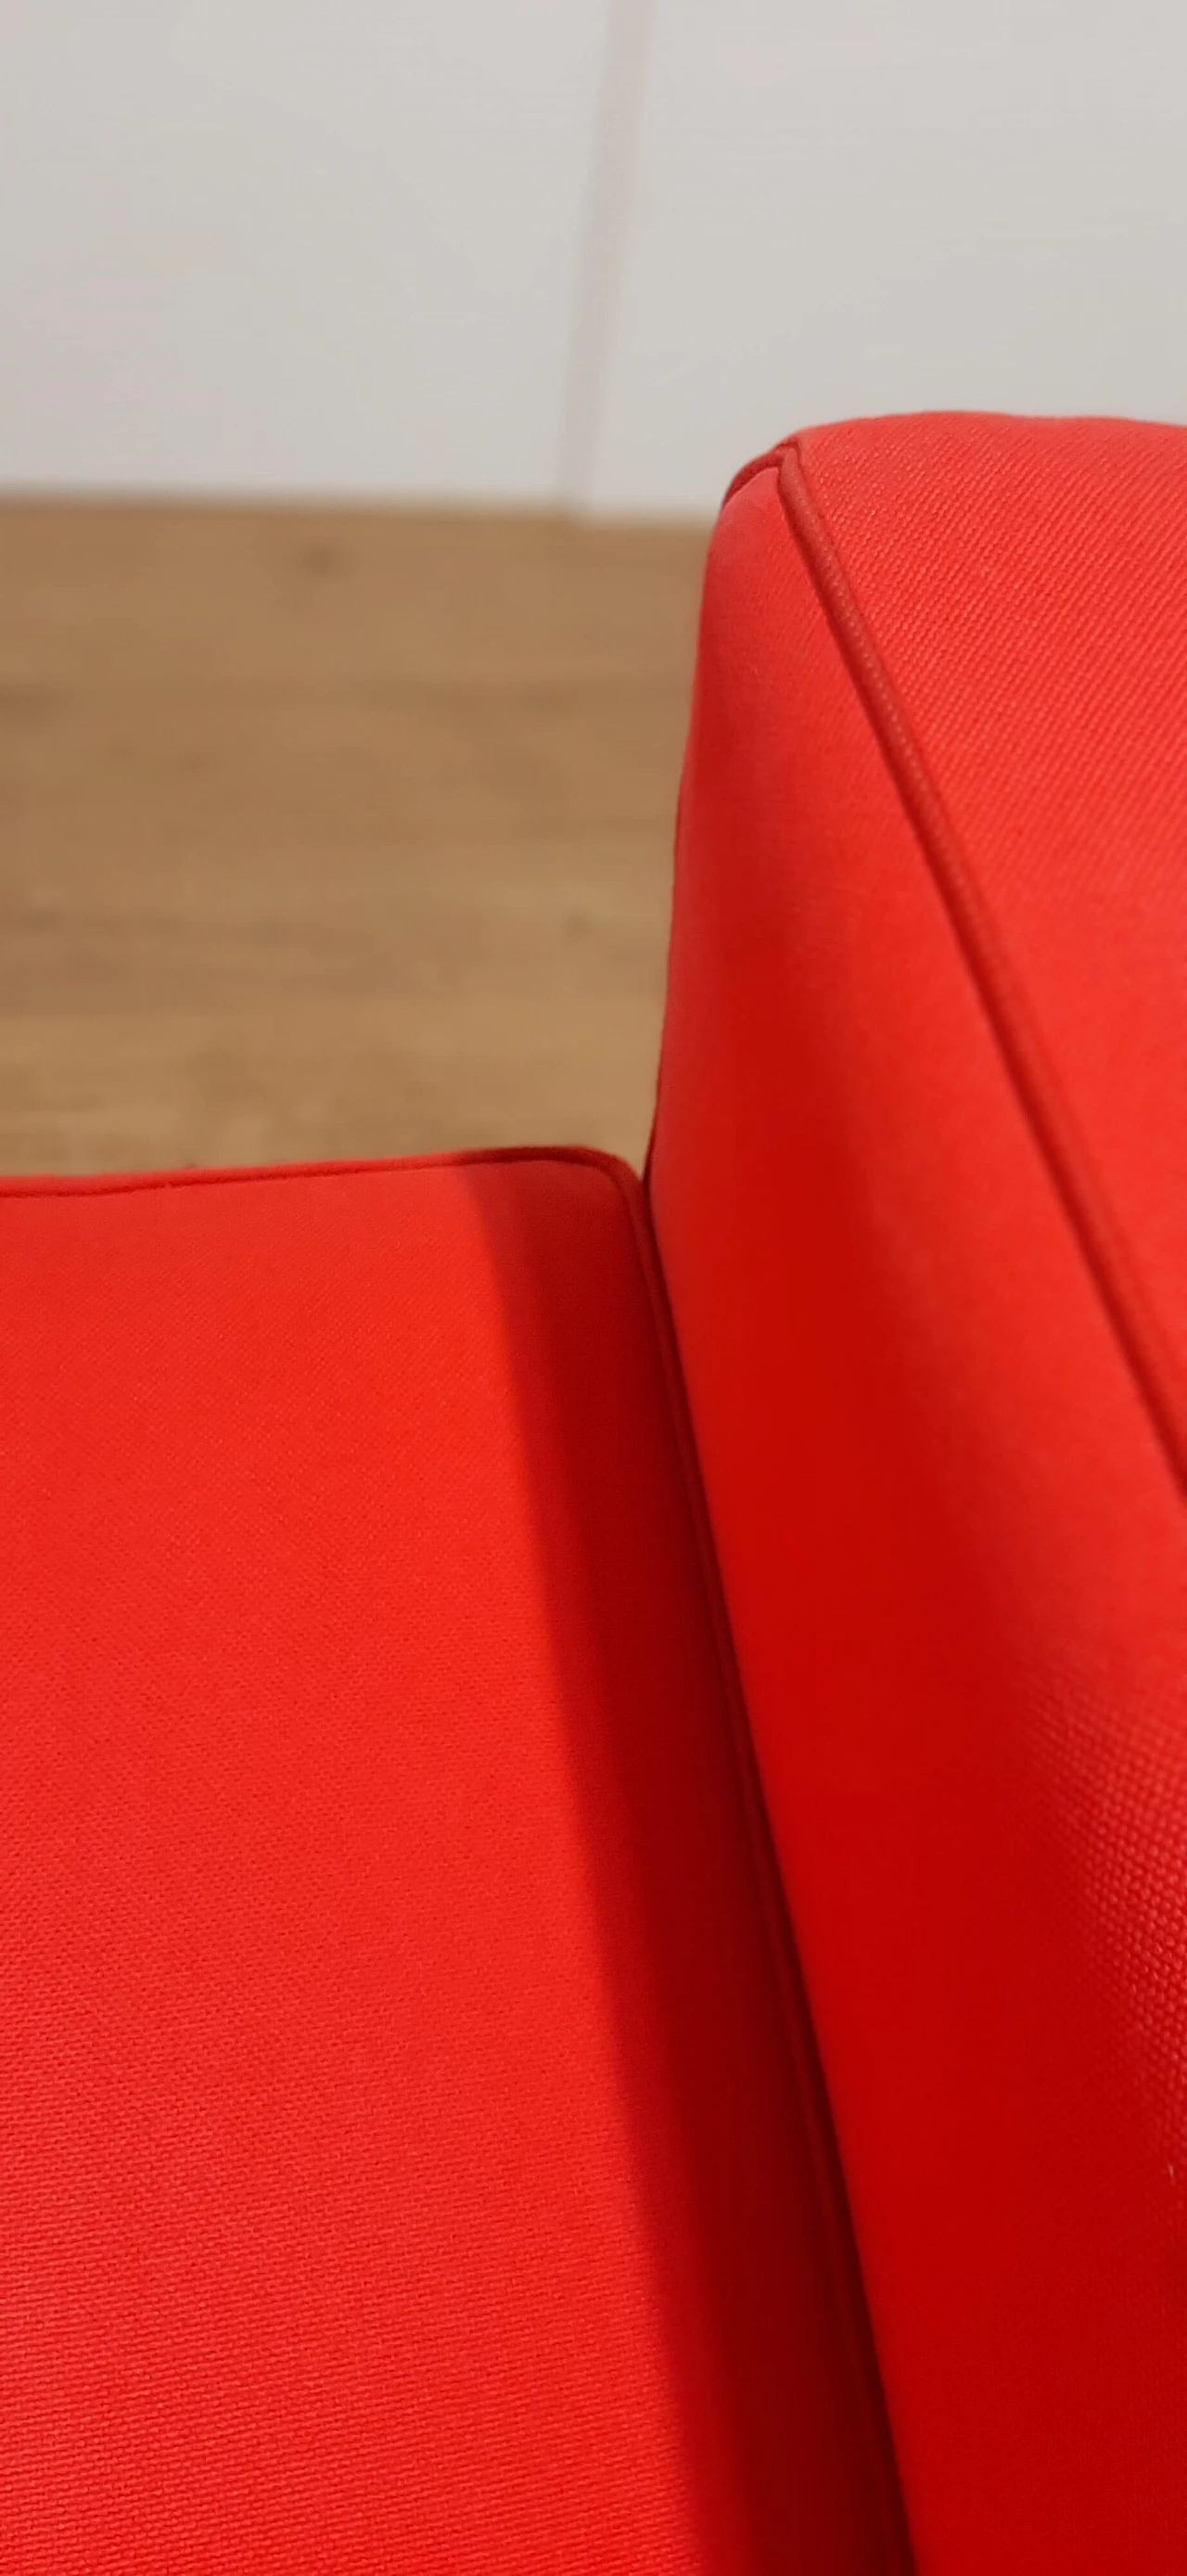 LC 2 armchair in red cotton by Le Corbusier, P. Jeanneret, C. Perriand for Alivar, 1980s 76